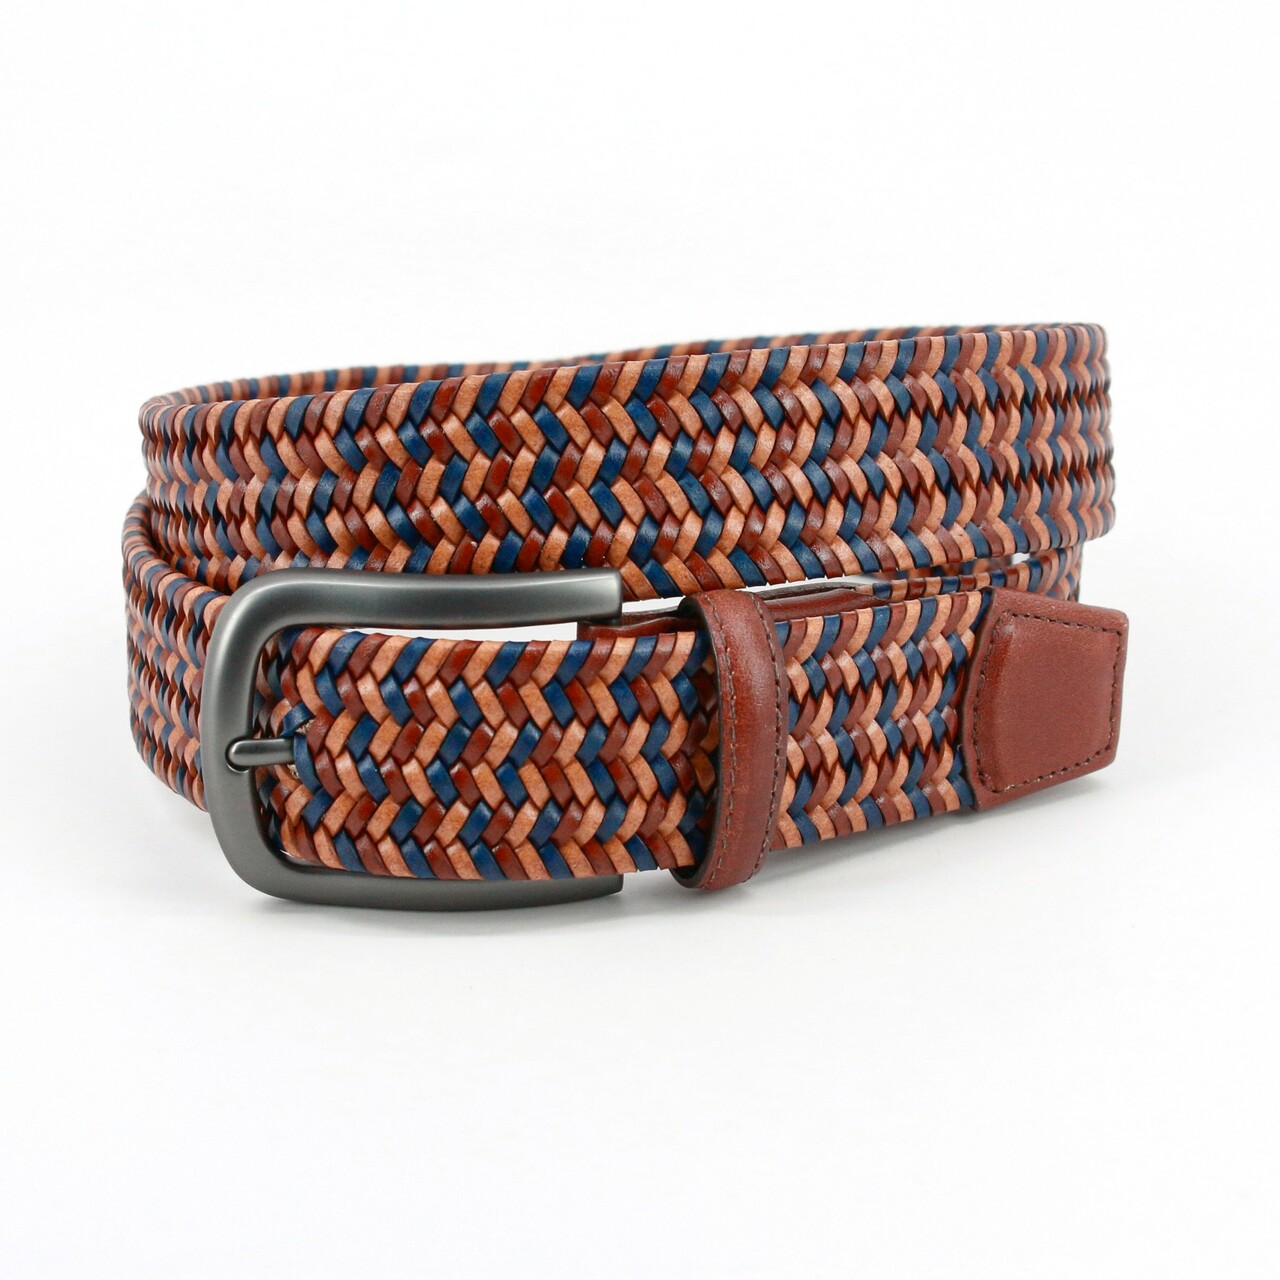 Italian Mini Strand Woven Stretch Leather Belt in Tan Multi by Torino  Leather Co. - Hansen's Clothing